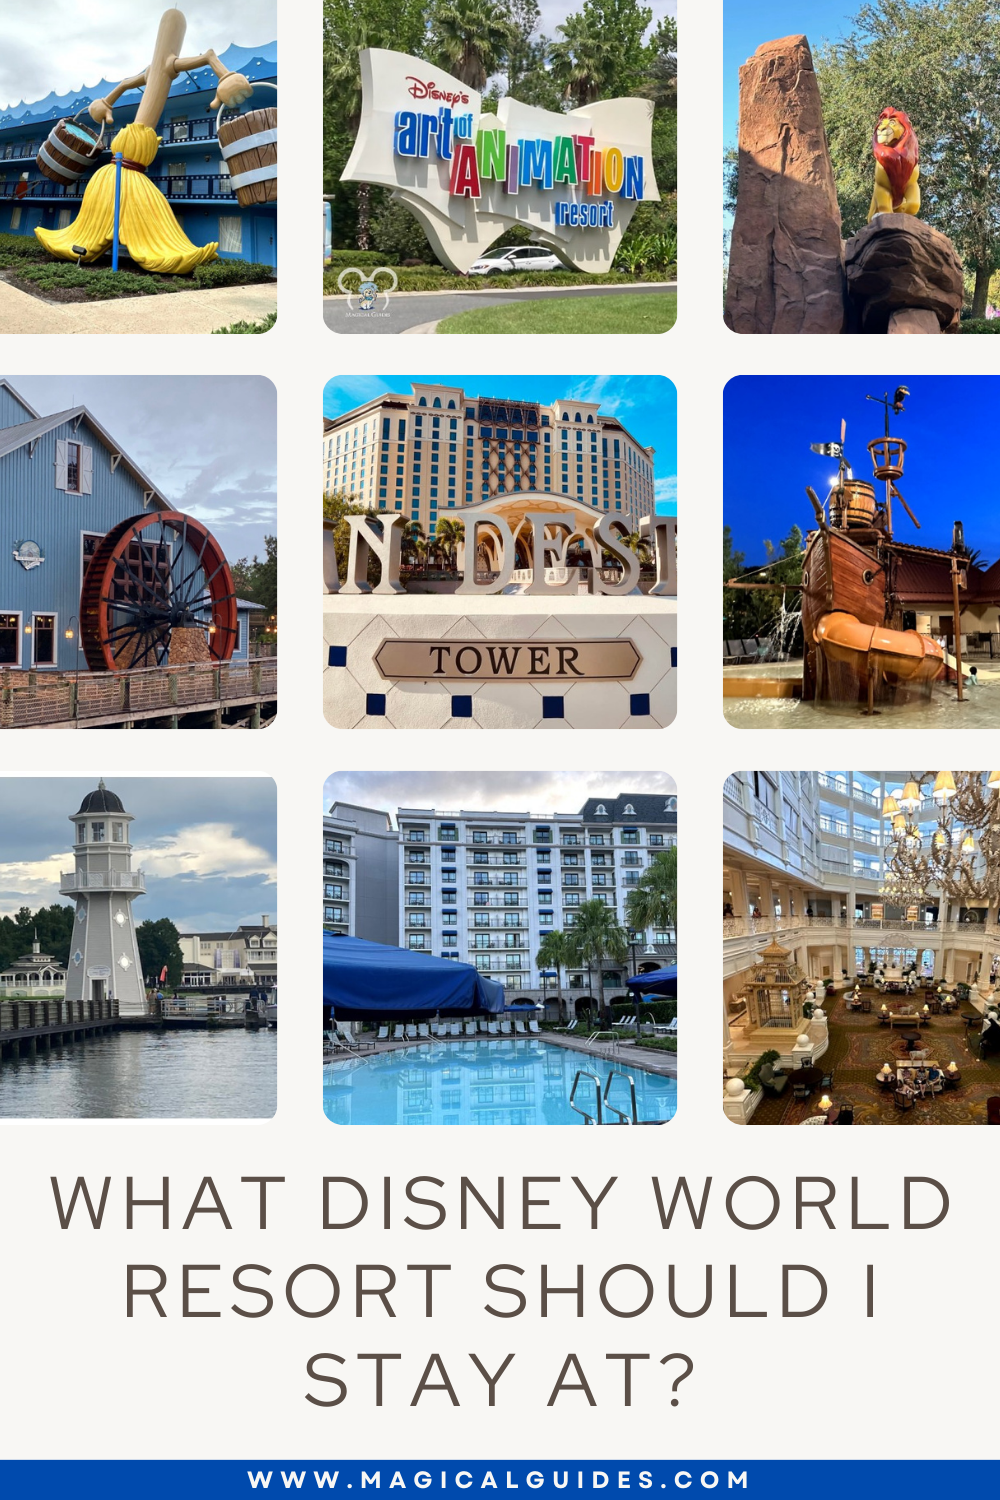 There are so many great options on Disney property it can be hard to choose. Use this guide to help you decide which resort is best for your Walt Disney World Vacation. Find the best resorts for large families, resorts for adults, for your budget, and so much more! This complete Disney World Resort Hotel Guide will help you find the perfect resort for you.